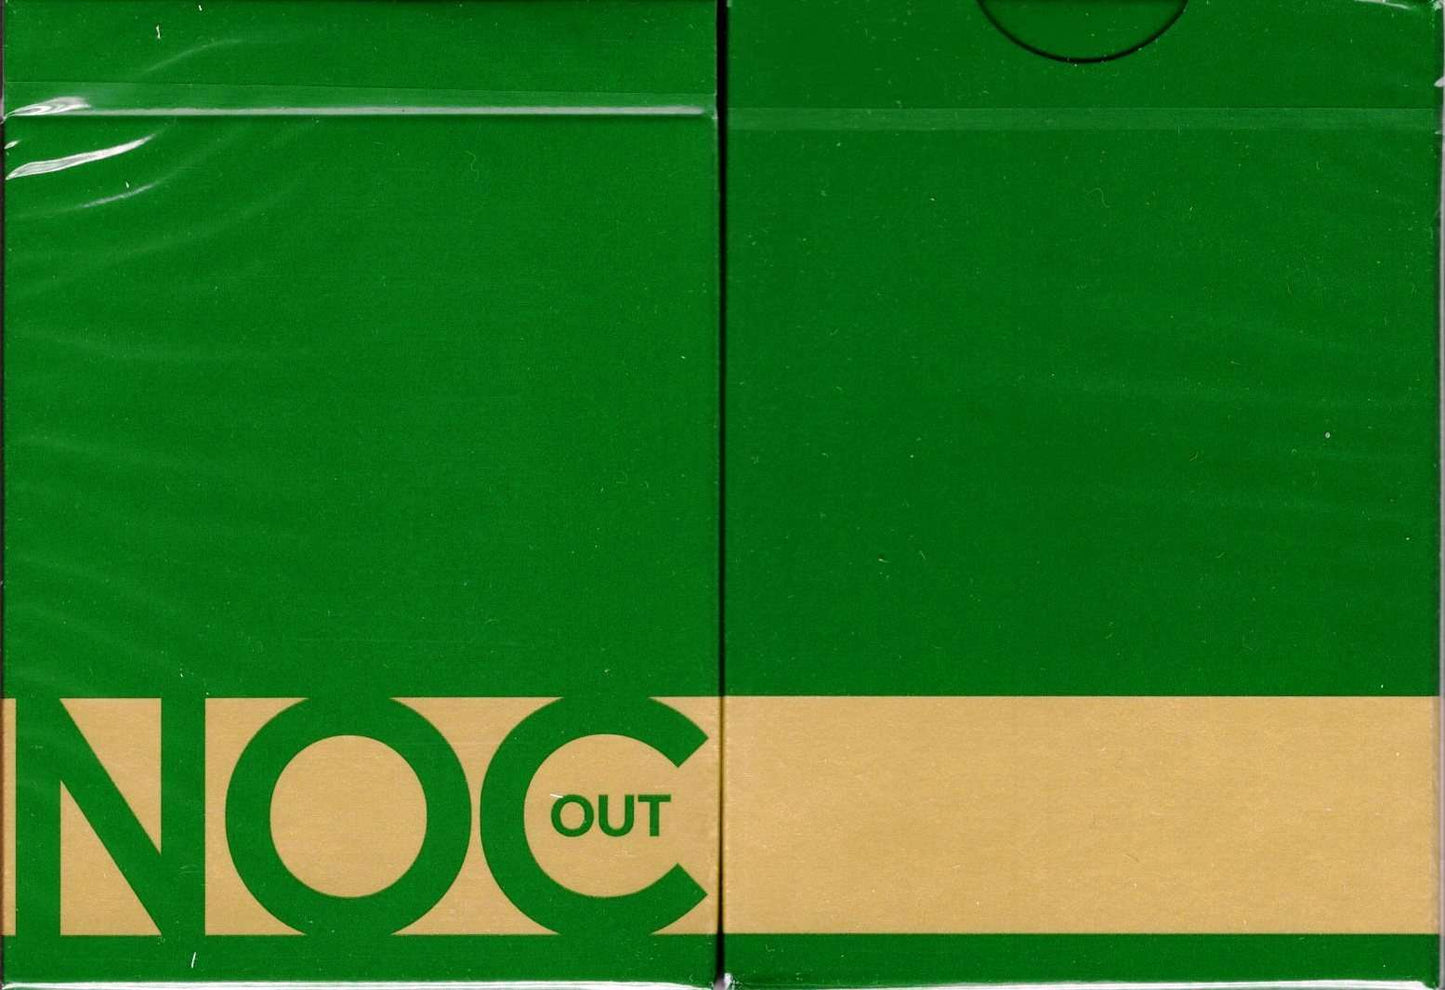 PlayingCardDecks.com-NOC Out Green Playing Cards USPCC